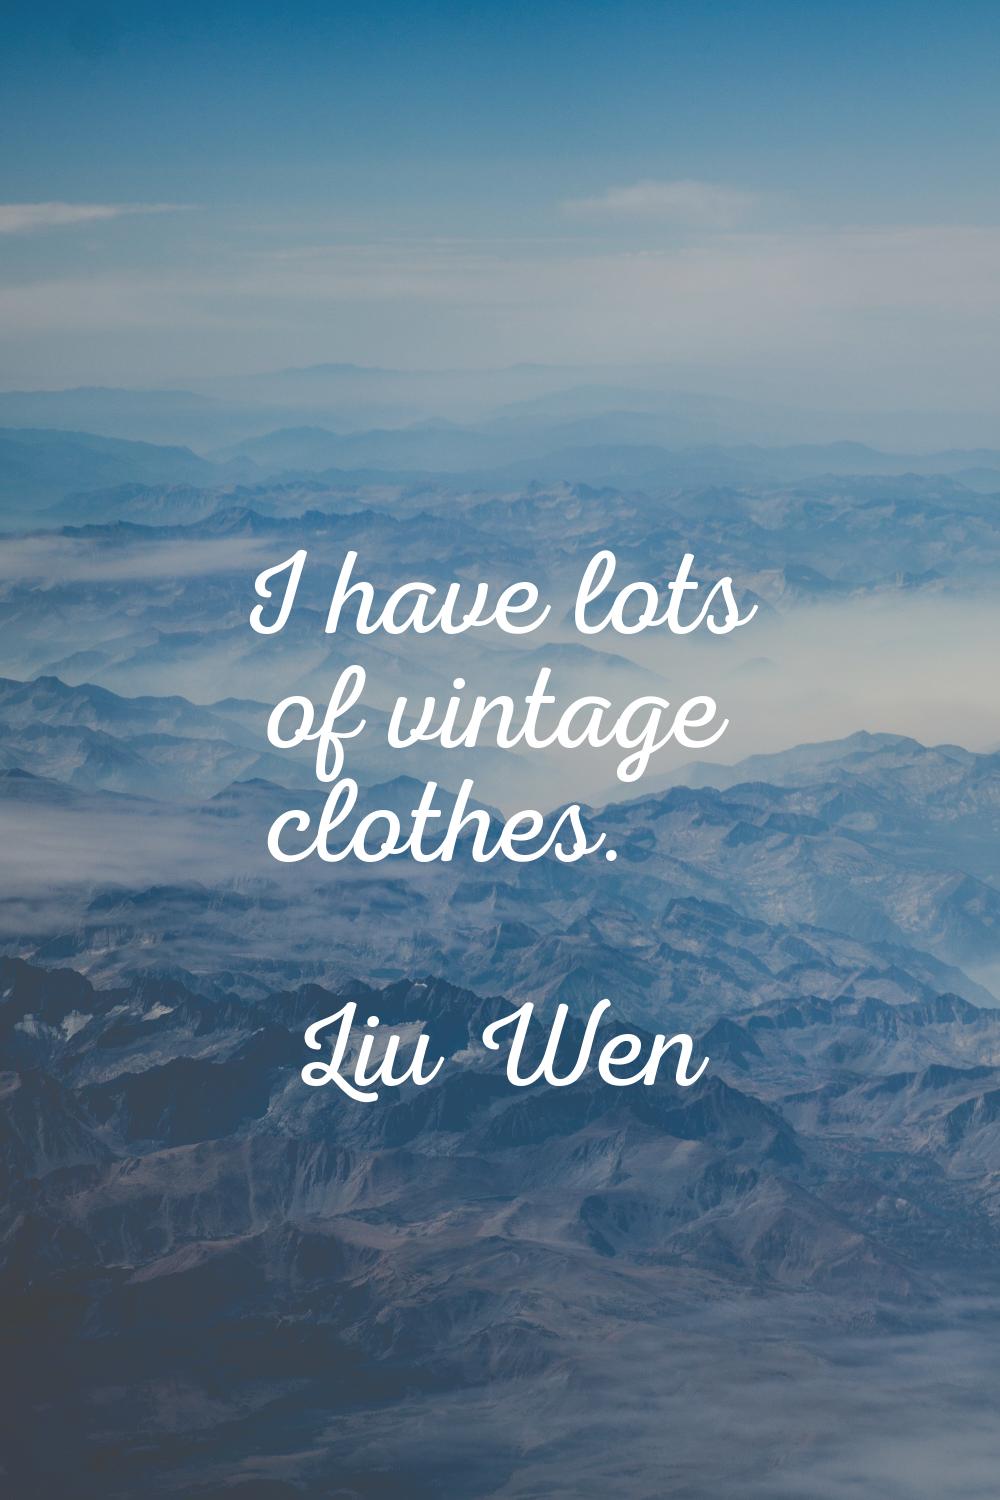 I have lots of vintage clothes.